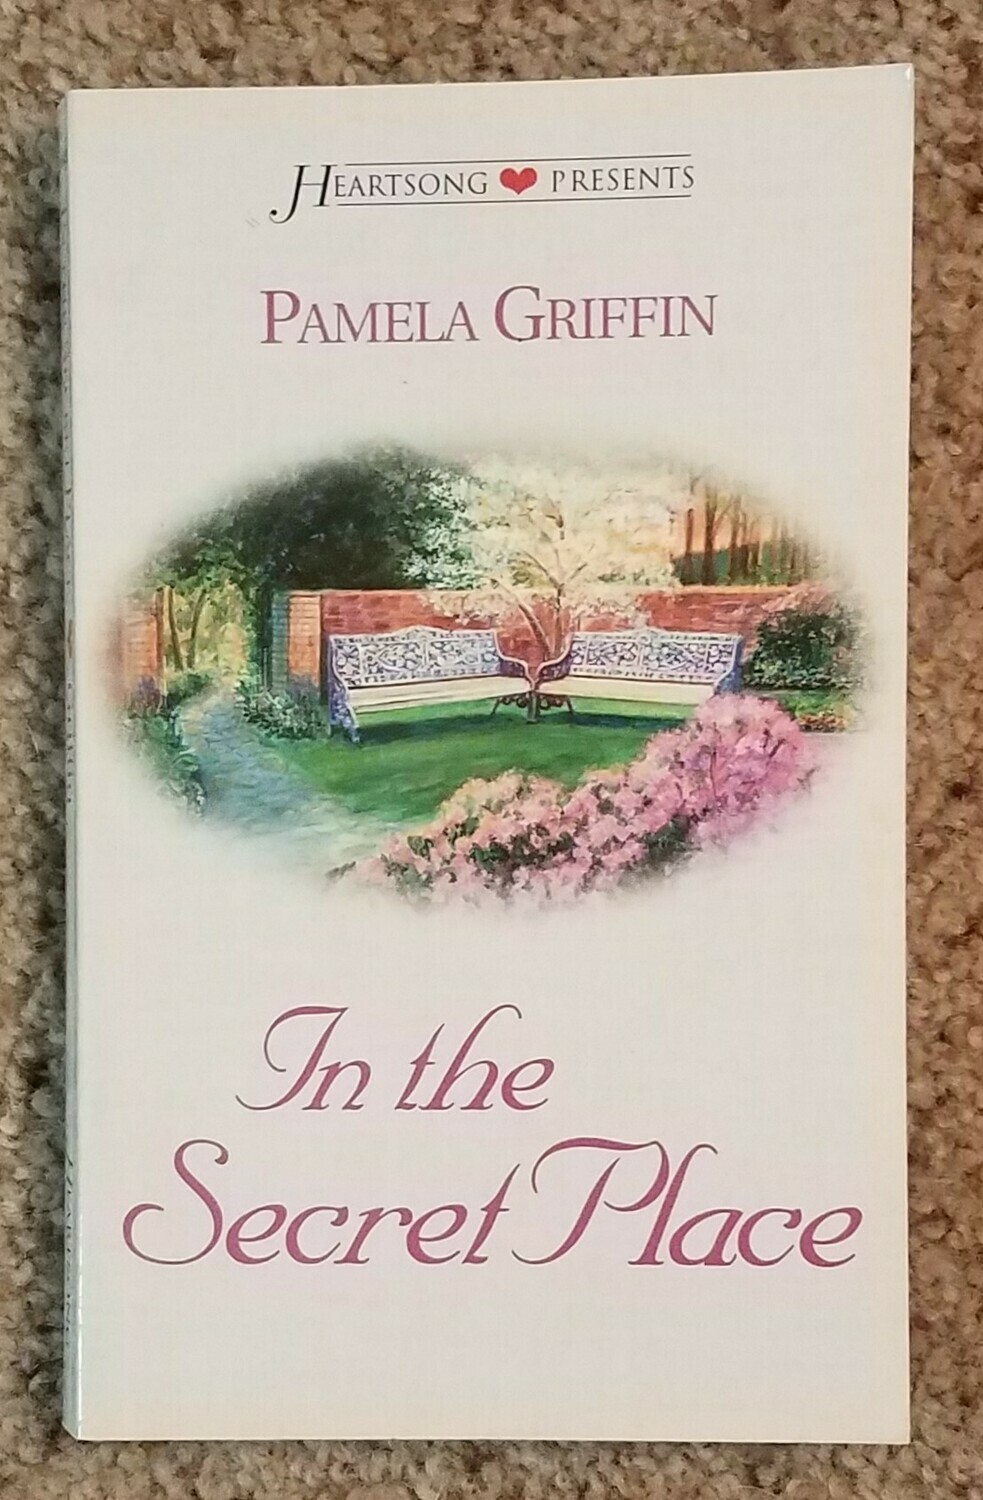 In the Secret Place by Pamela Griffin